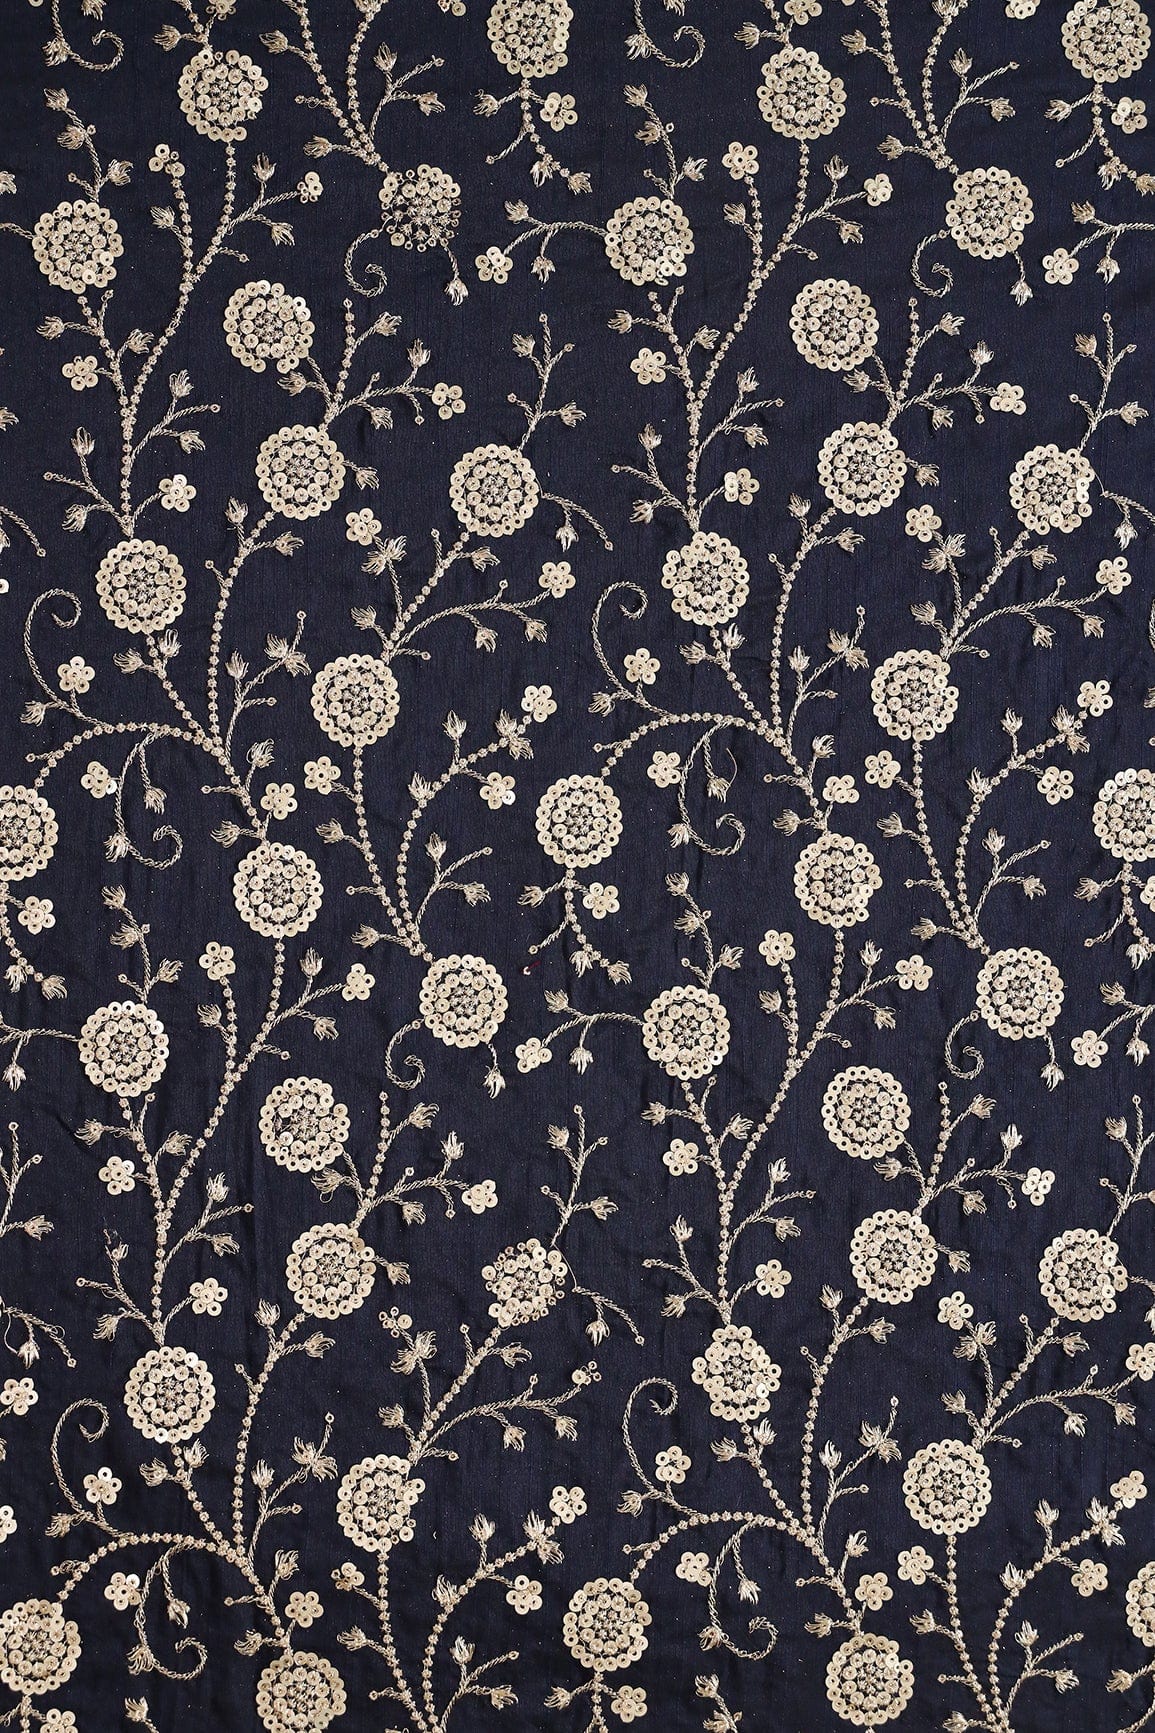 doeraa Embroidery Fabrics Gold Zari With Gold Sequins Beautiful Floral Embroidery Work On Navy Blue Raw Silk Fabric